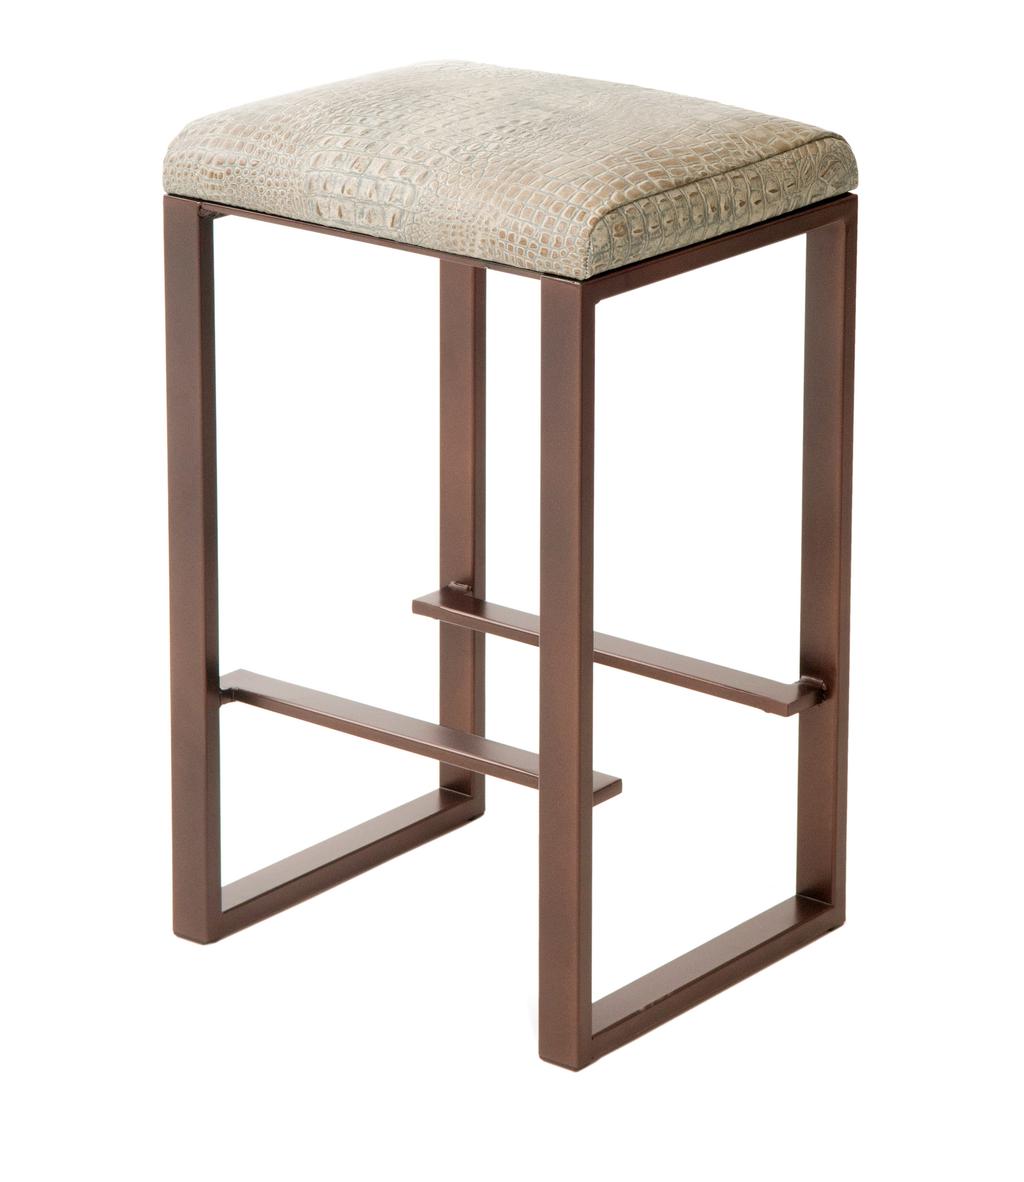 C961 Clement Counterstool Shown in Oil-Rubbed Bronze (78) with a Stone Gate Croc Leather